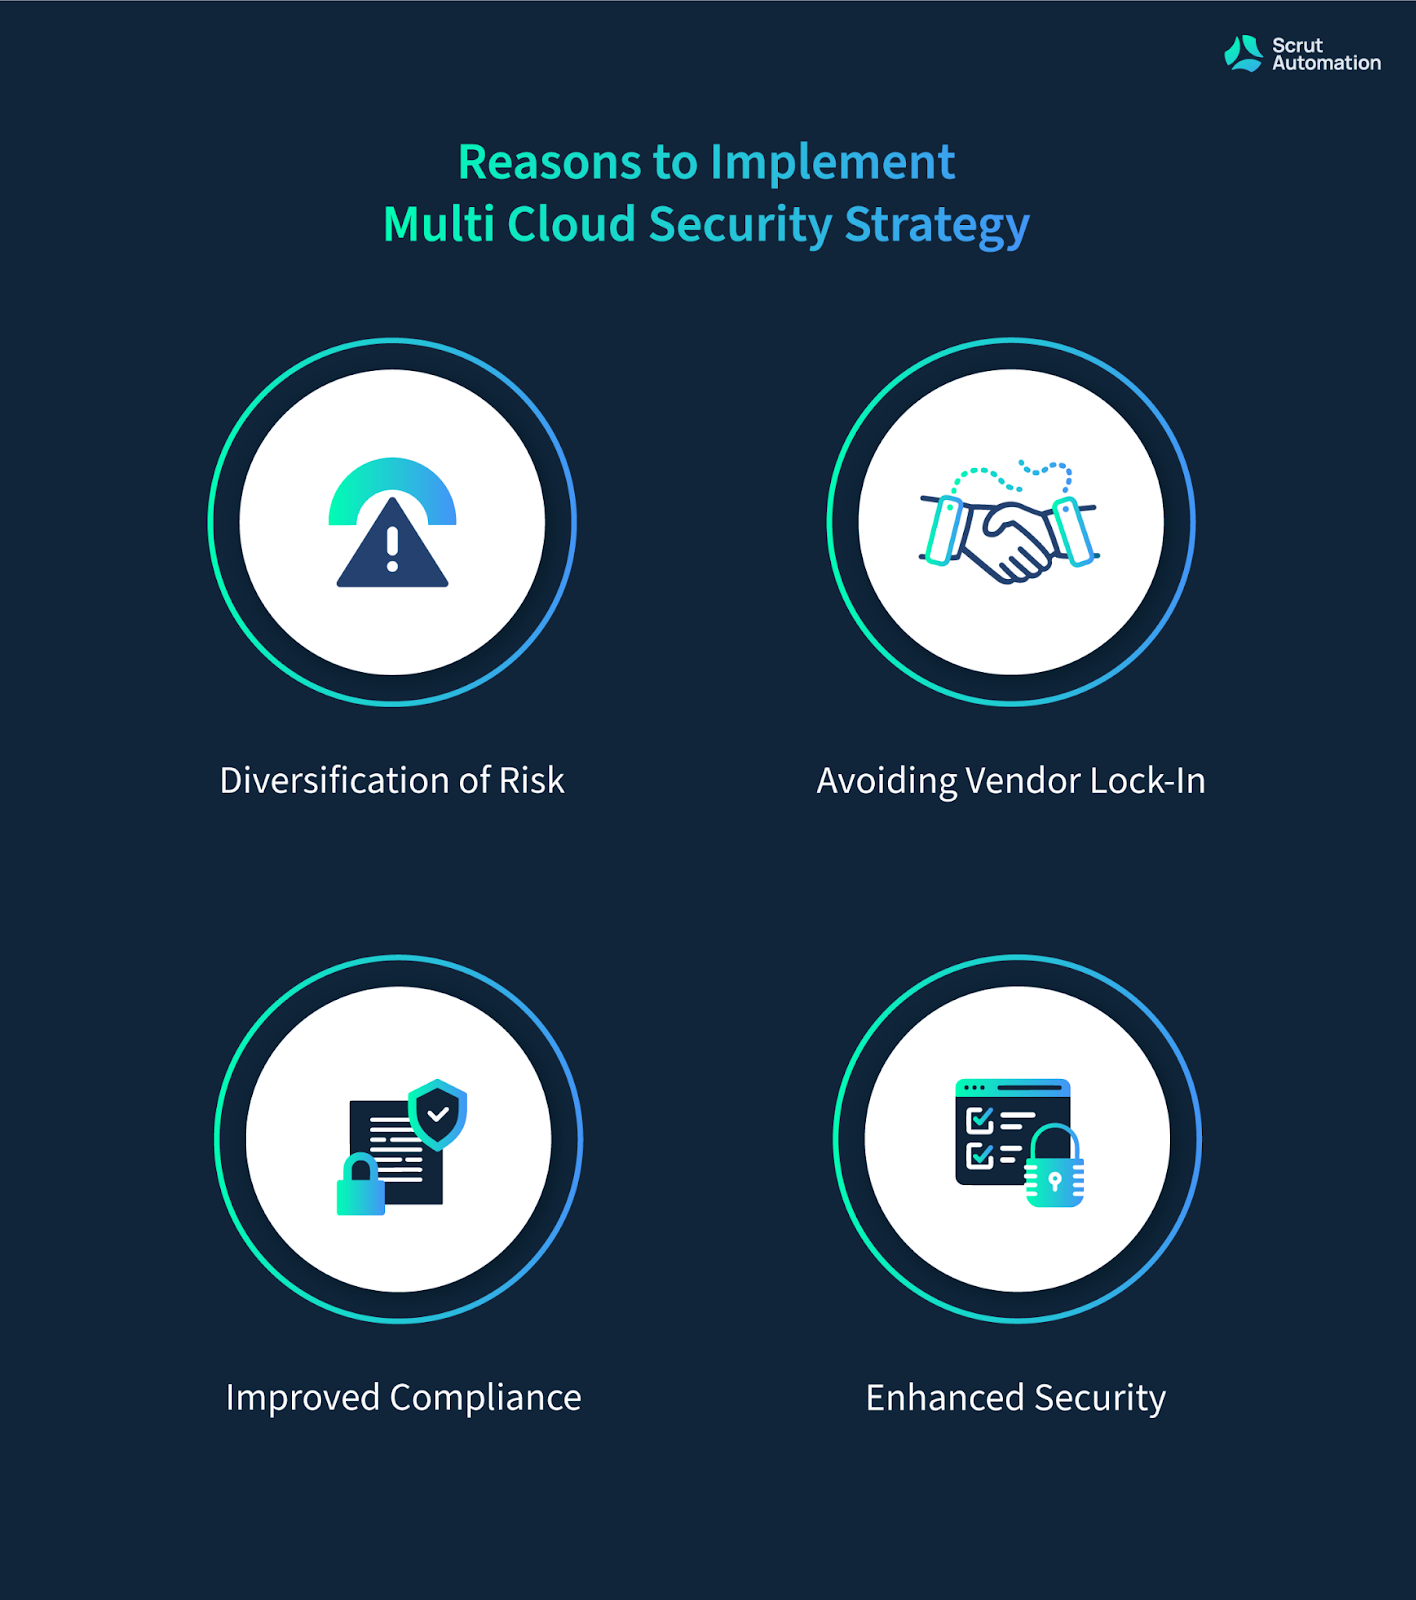 Reasons to implement multi cloud security